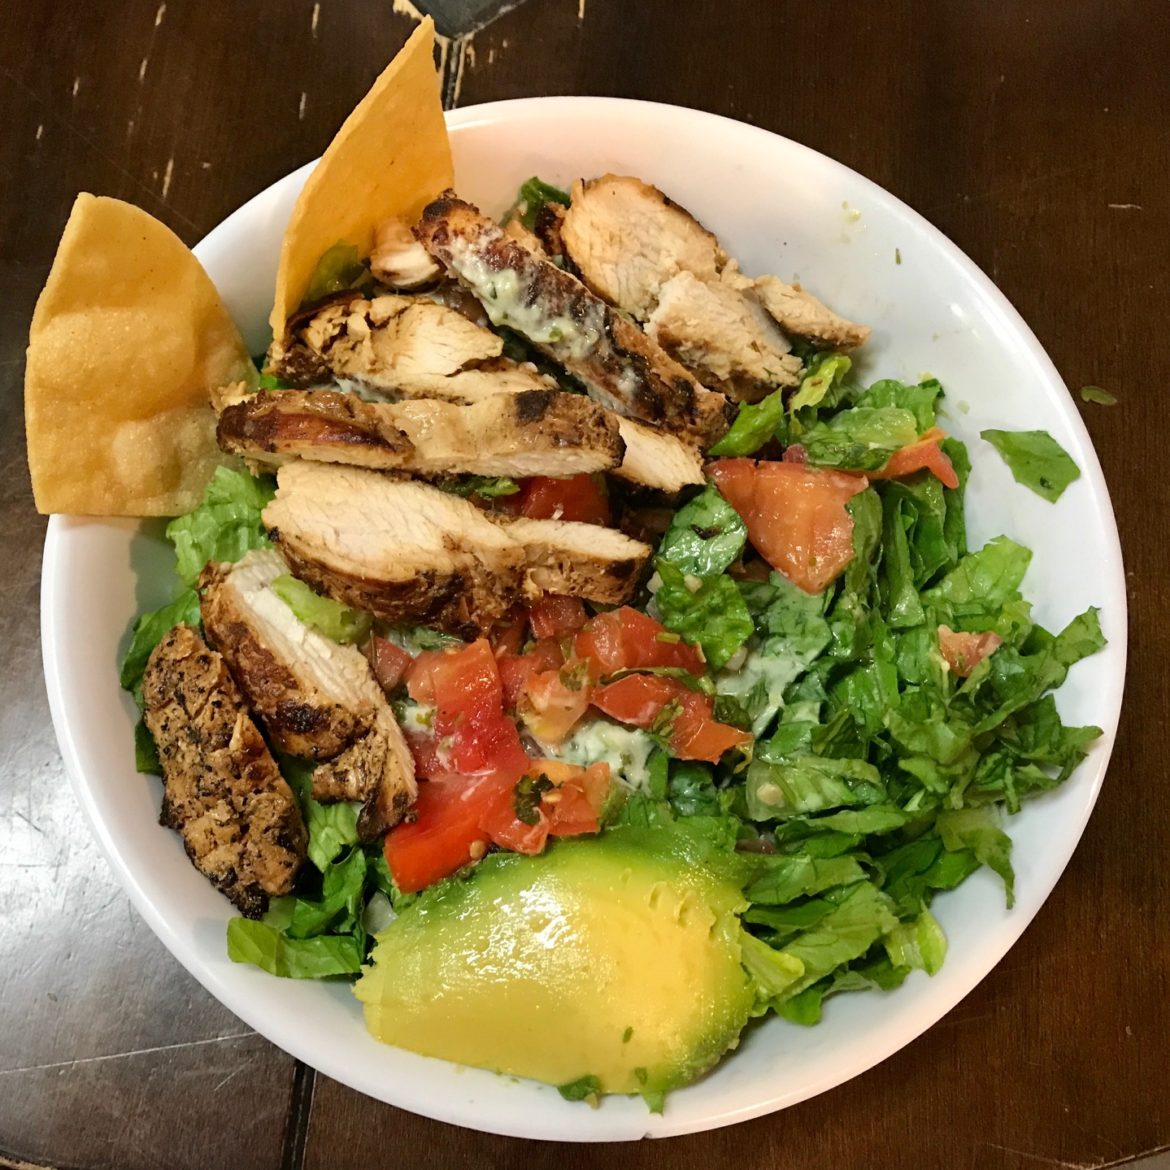 Grilled chicken burrito bowl from La Bonita's in downtown Palm Springs